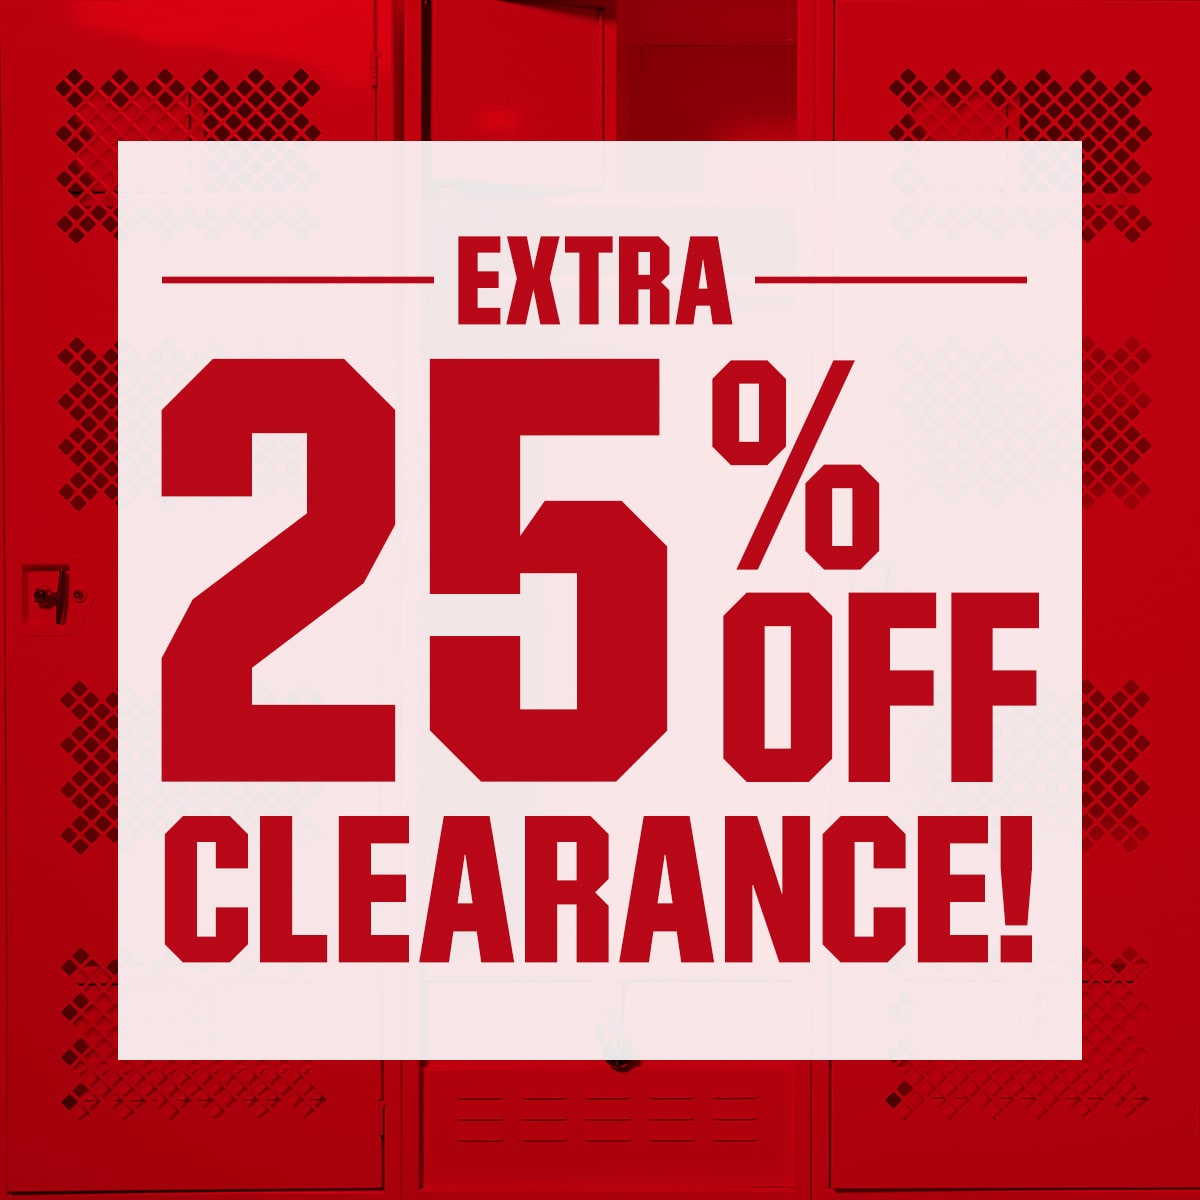 Extra 25% off clearance! EXTRA 2 i CLEARANCE! 